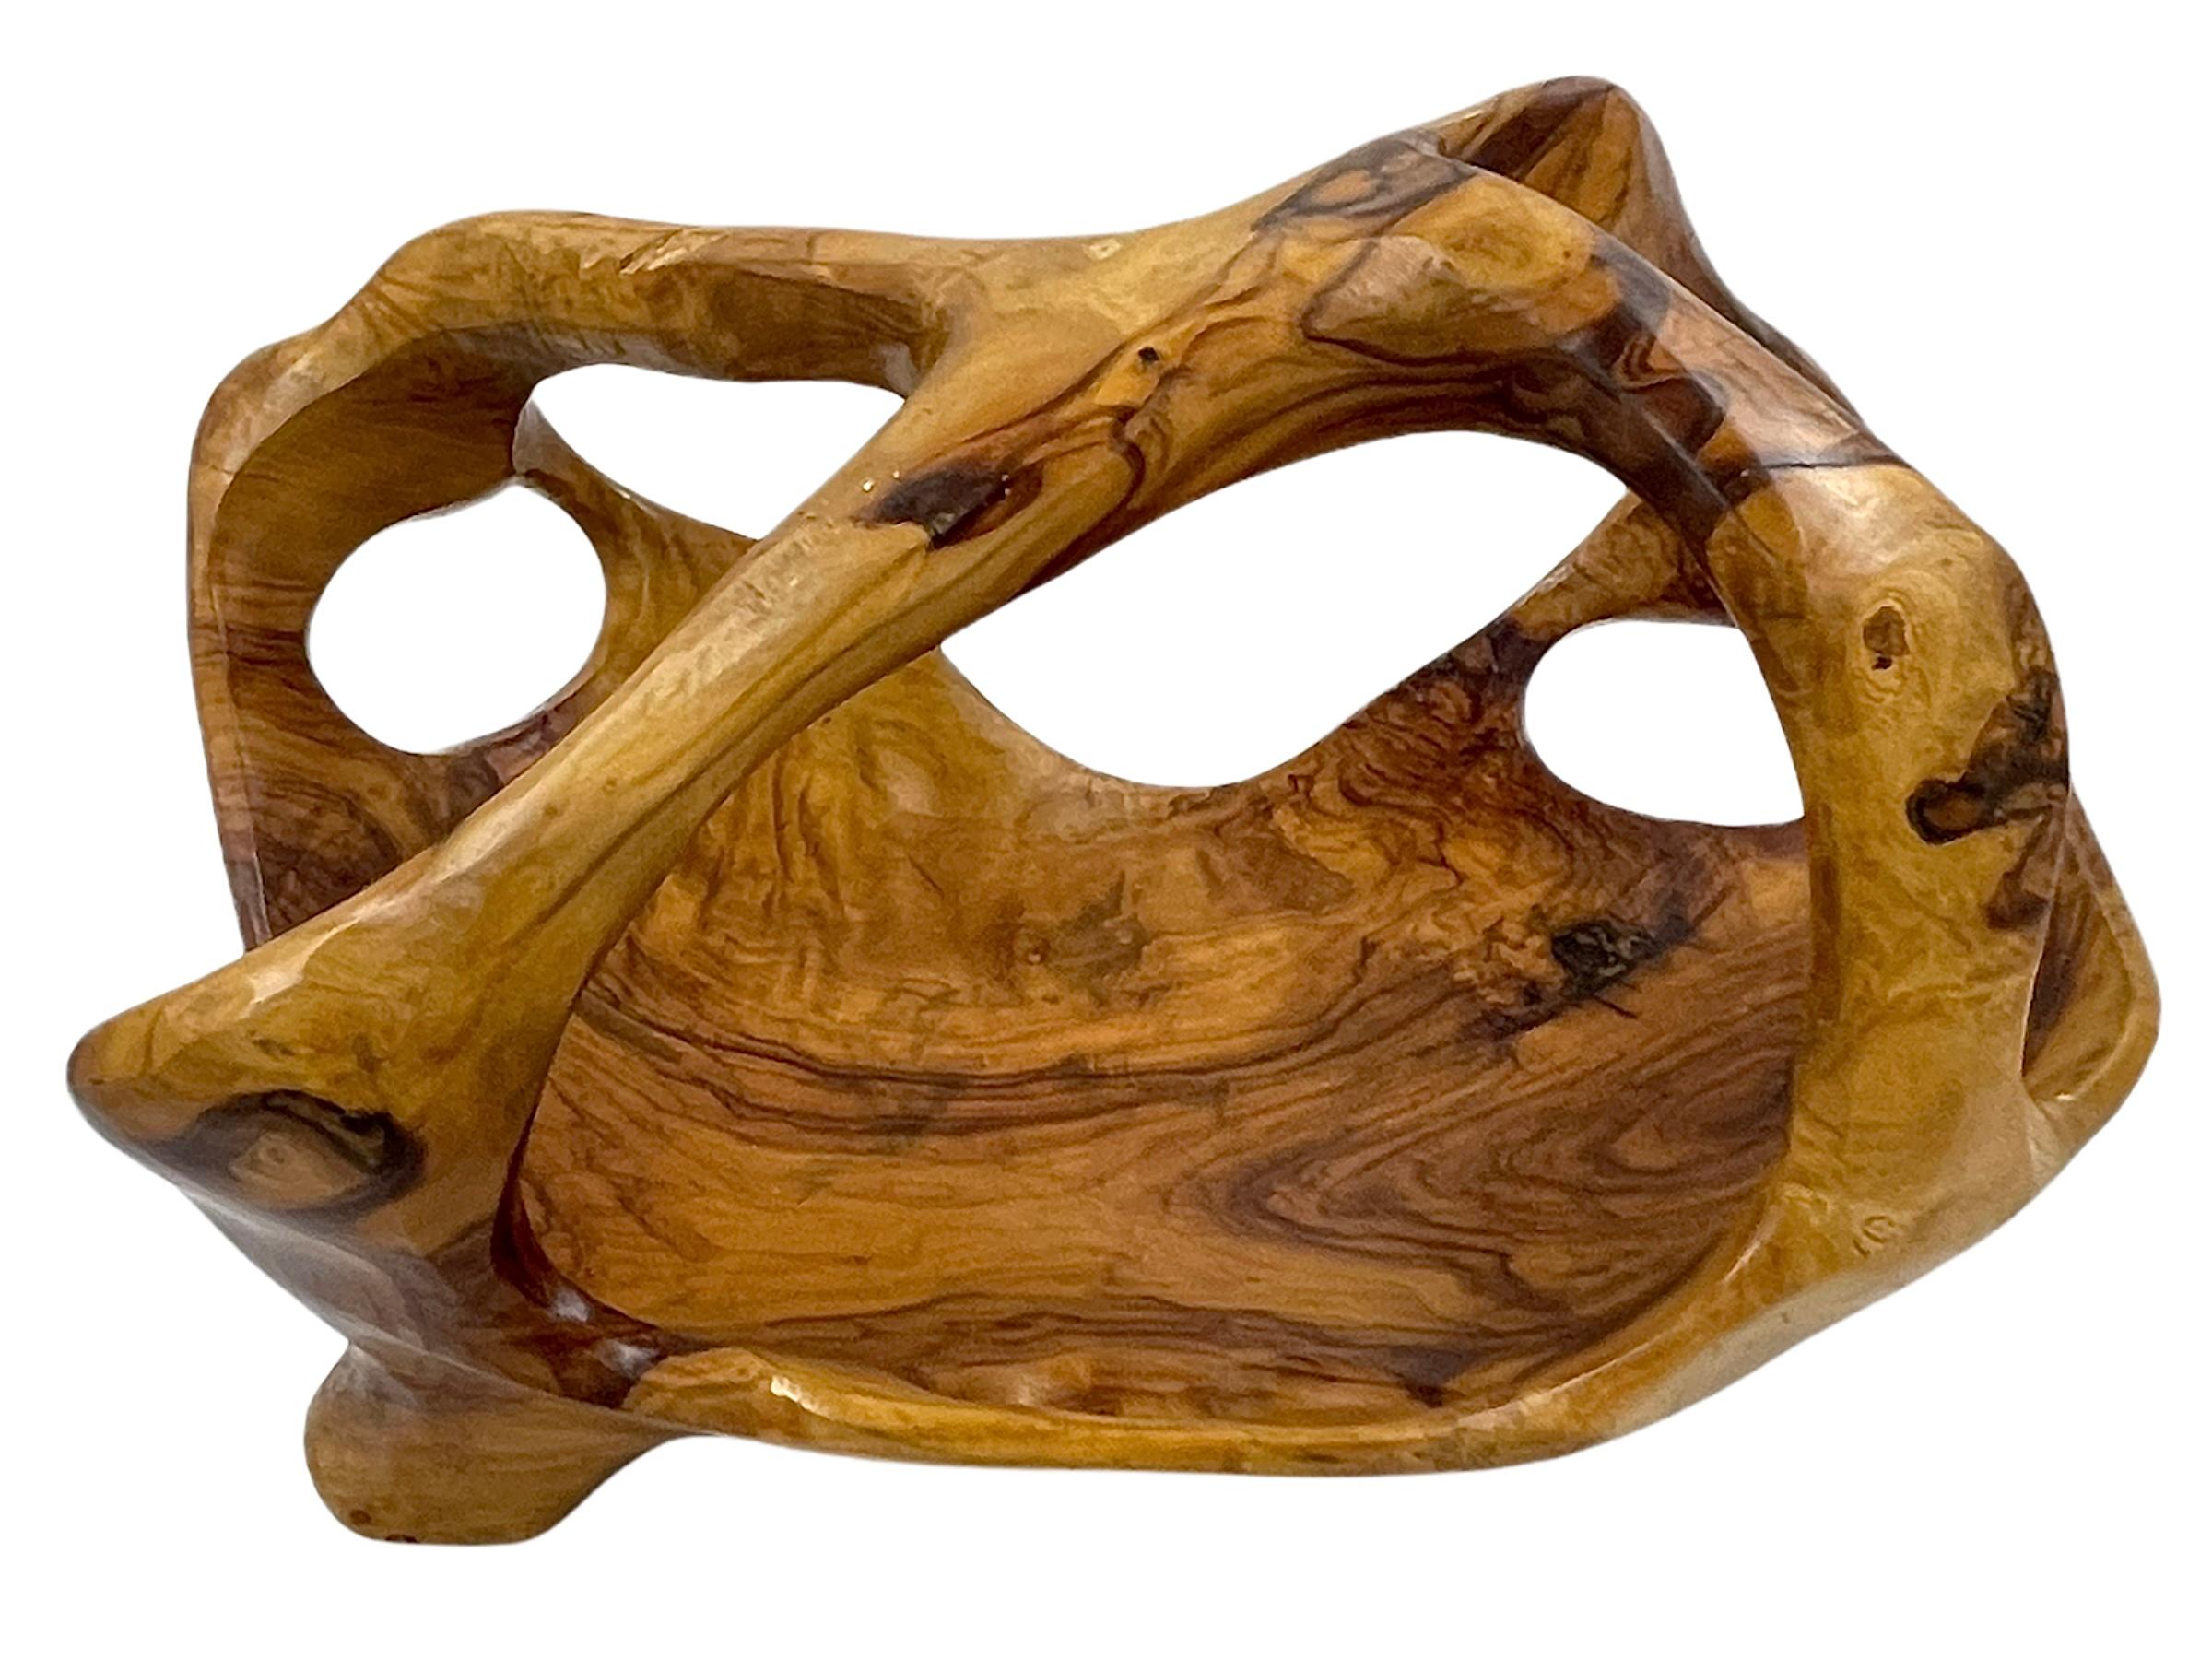 A teak burl wood bowl crafted with a shiny polished finish. The bowl was cut from a much larger slab of burl wood and maintains an incredibly organic shape that is rich in texture.

Measures: 8.75” x 15” x 11”.